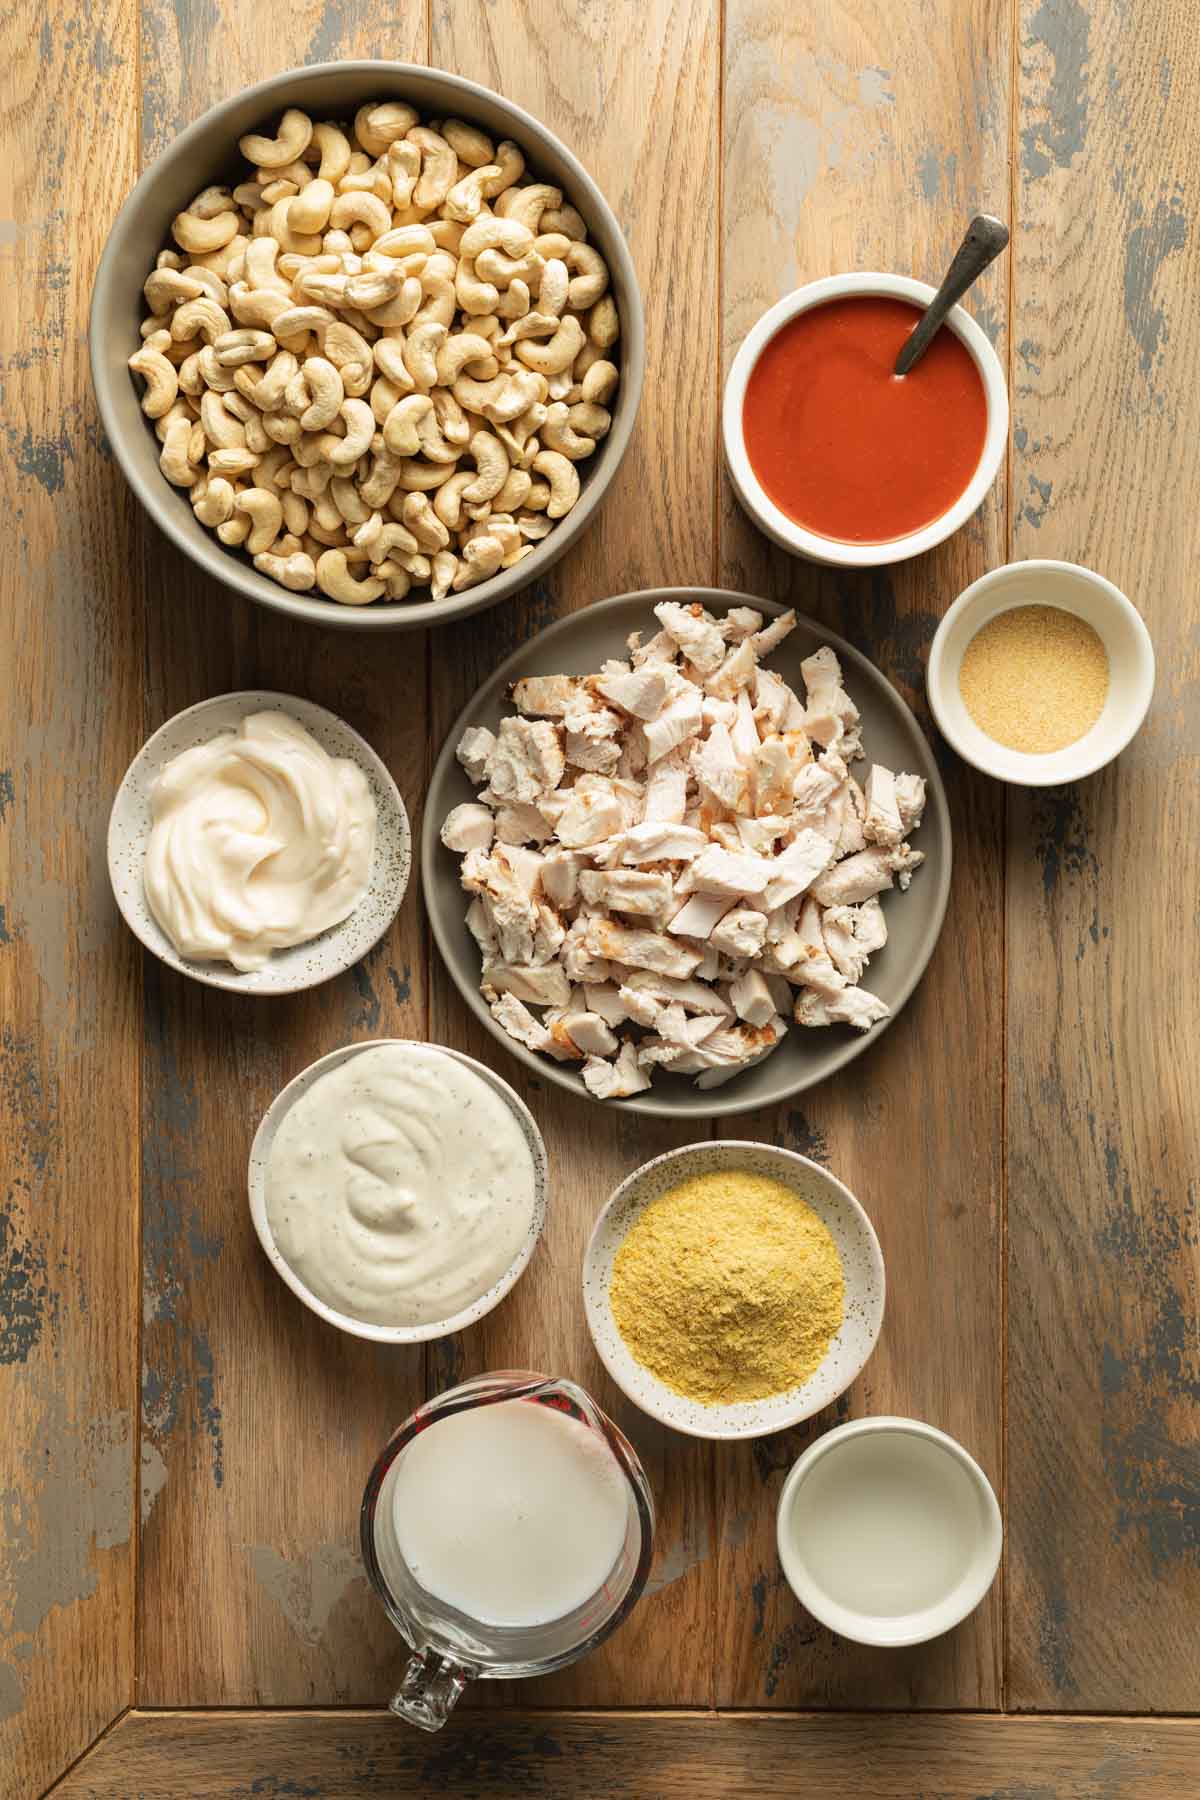 Ingredients to make buffalo chicken dip arranged individually on a wooden surface.